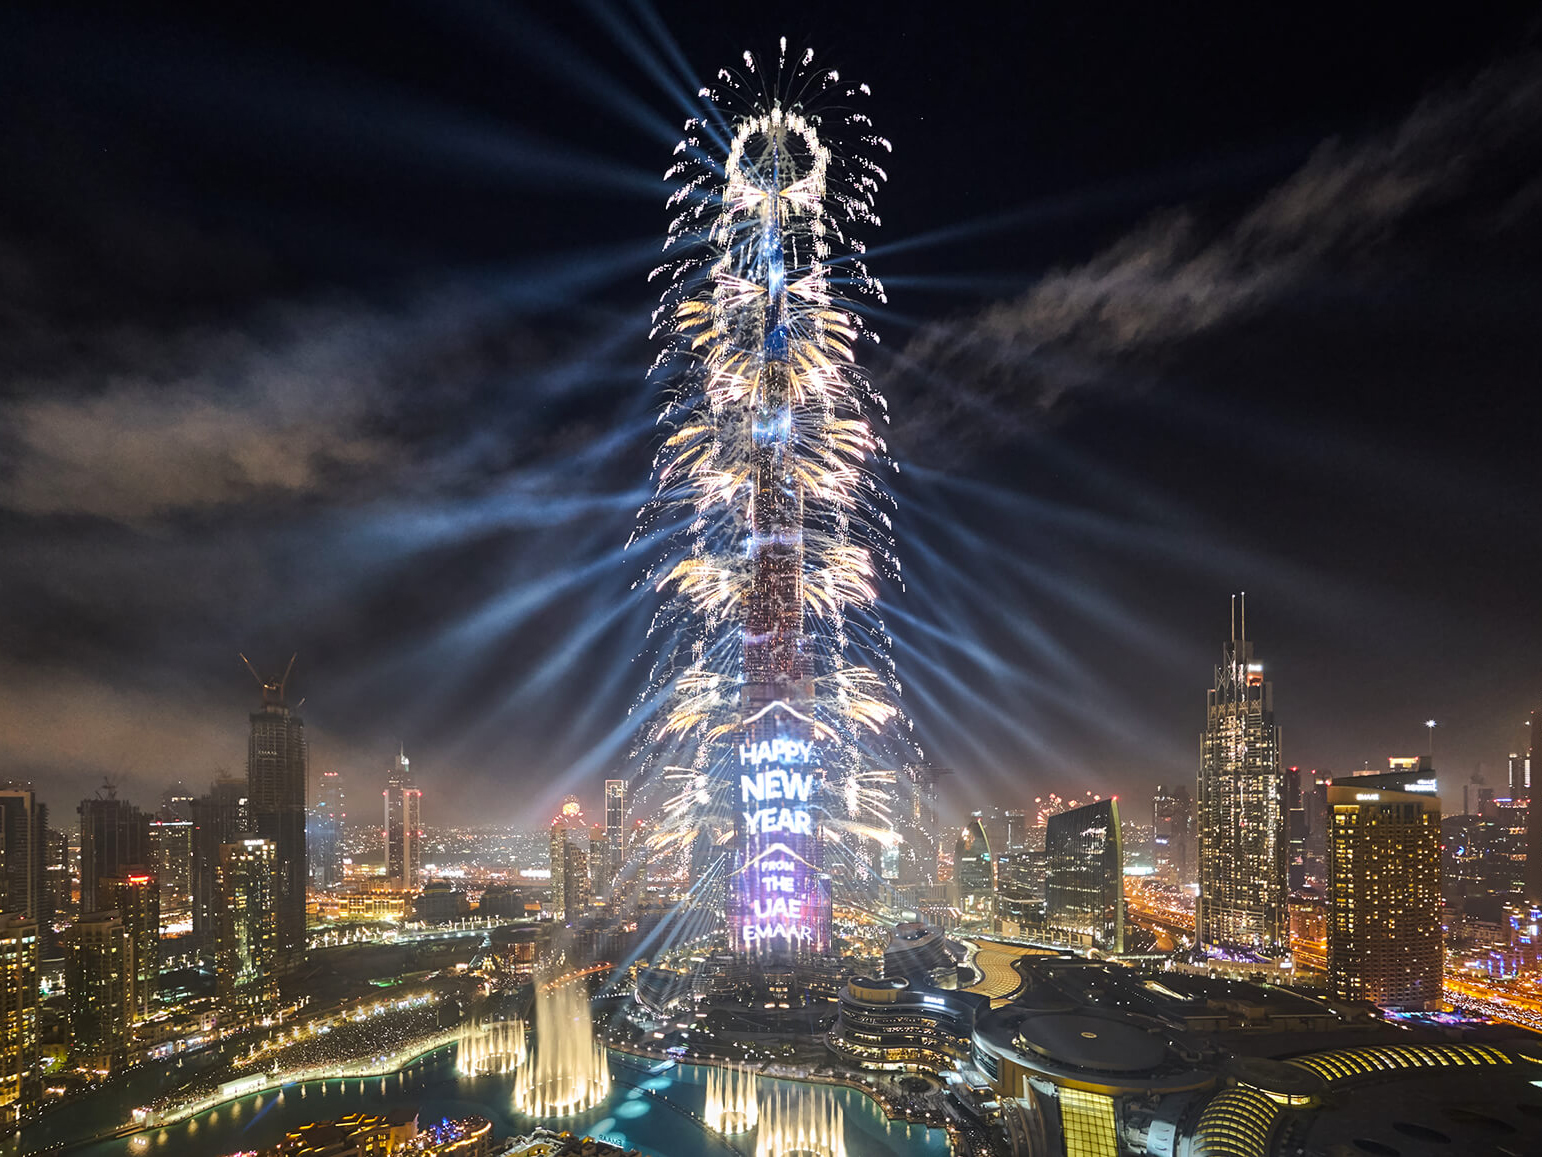 Places to celebrate New Year in the Middle East - Dubai, United Arab Emirates